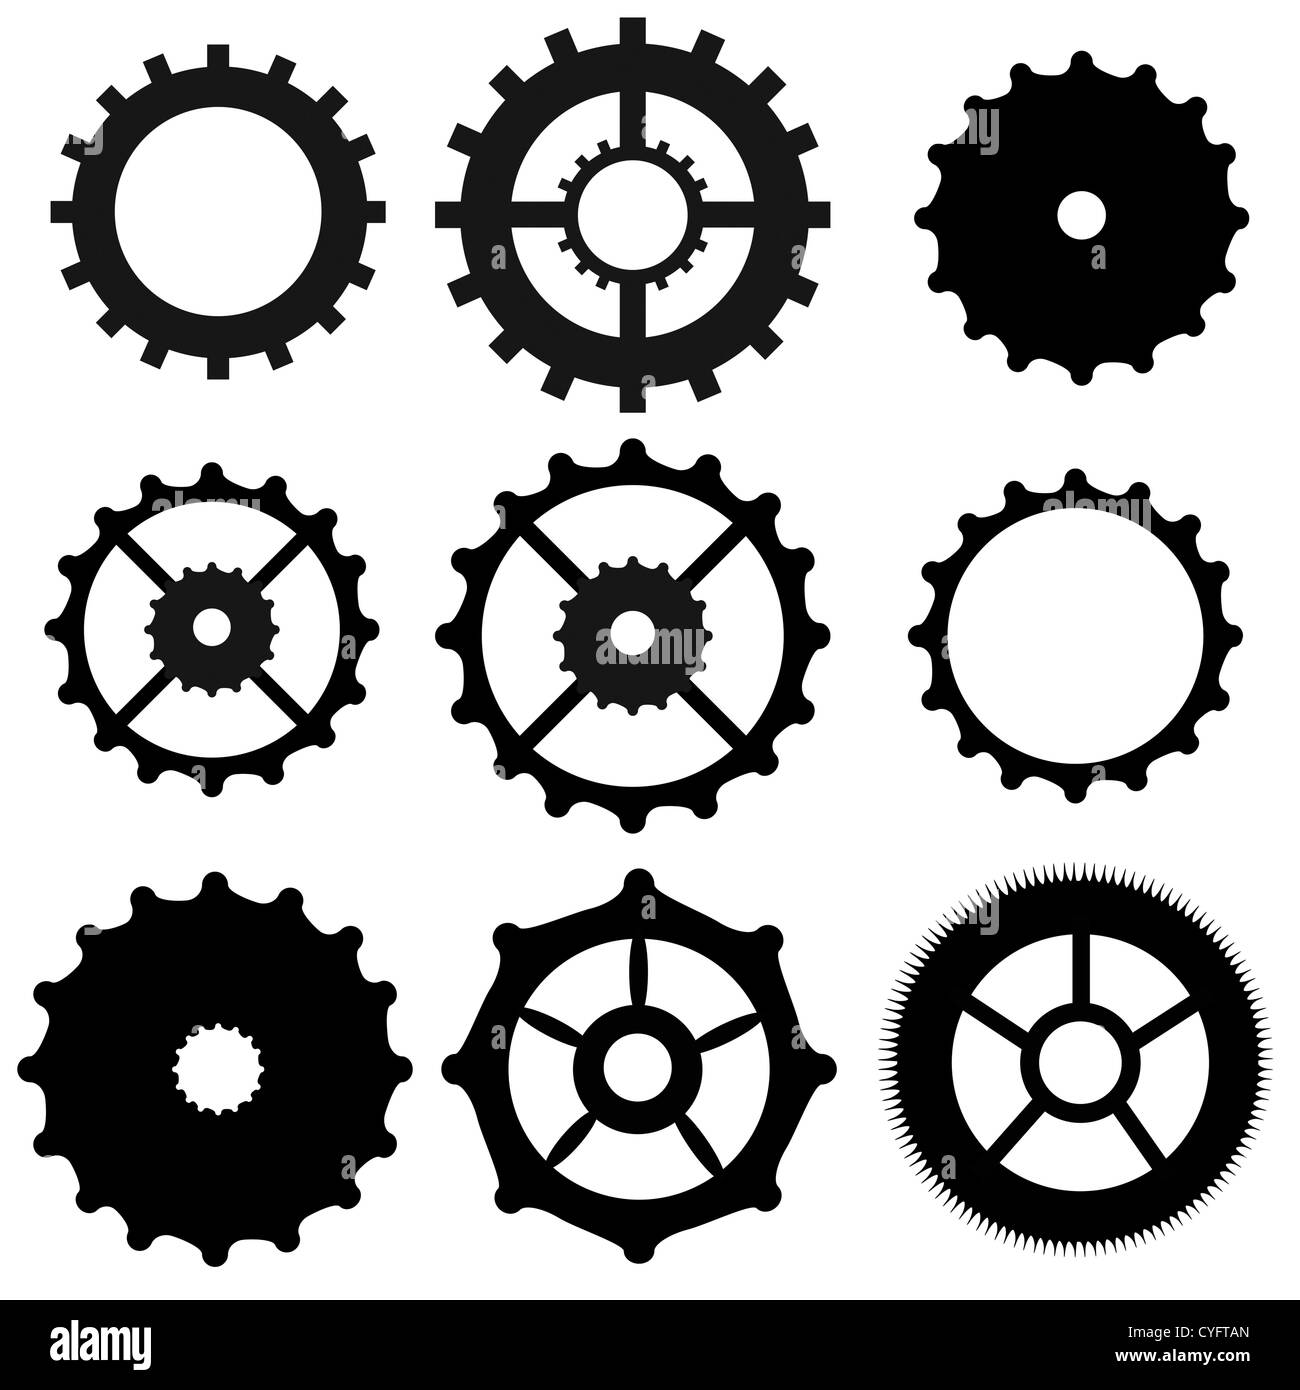 Set of gear wheels collection on white background, vector illustration Stock Photo